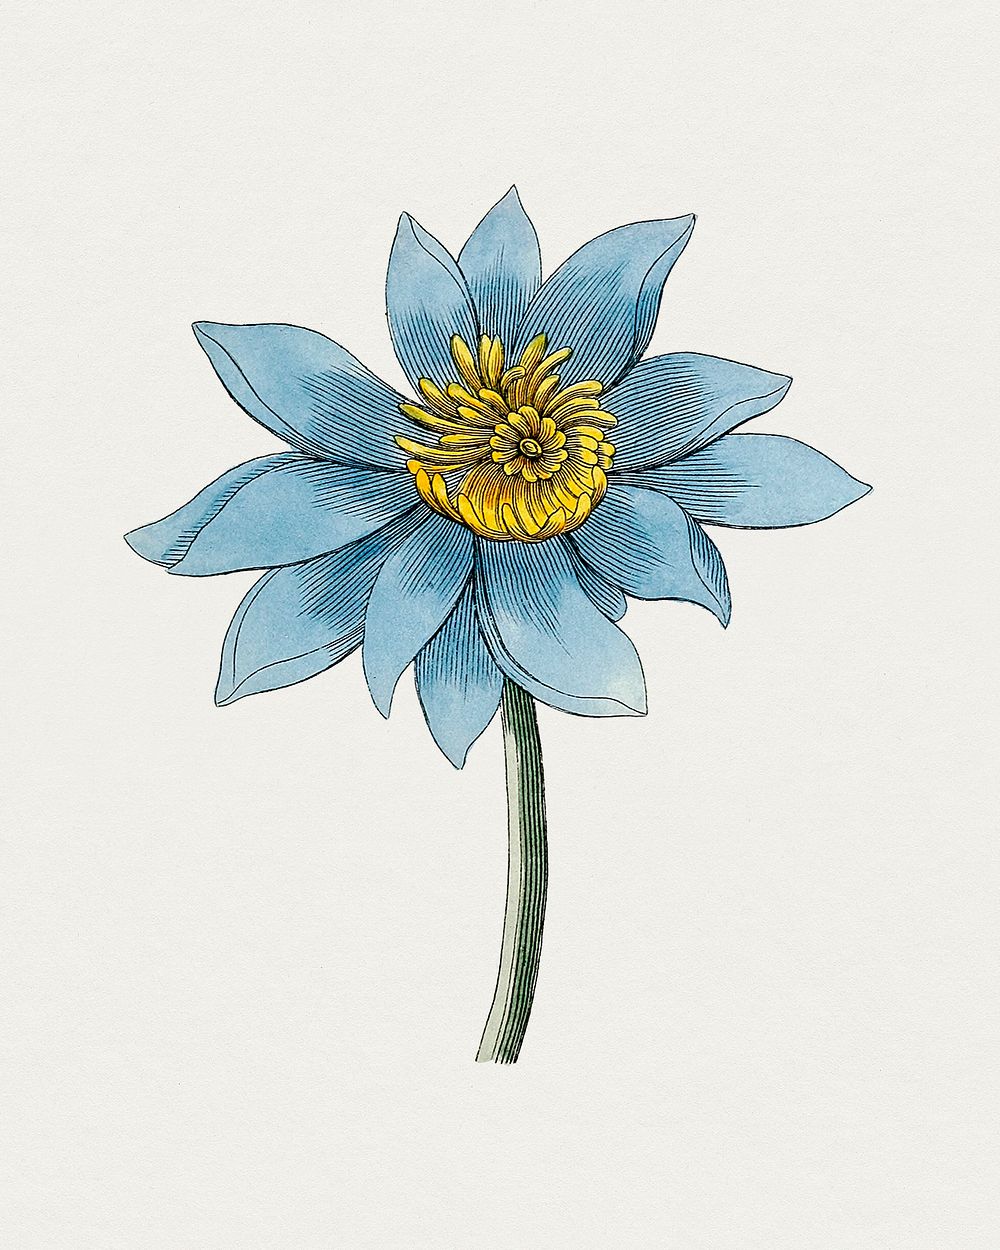 Hand drawn blue lotus. Original from Biodiversity Heritage Library. Digitally enhanced by rawpixel.